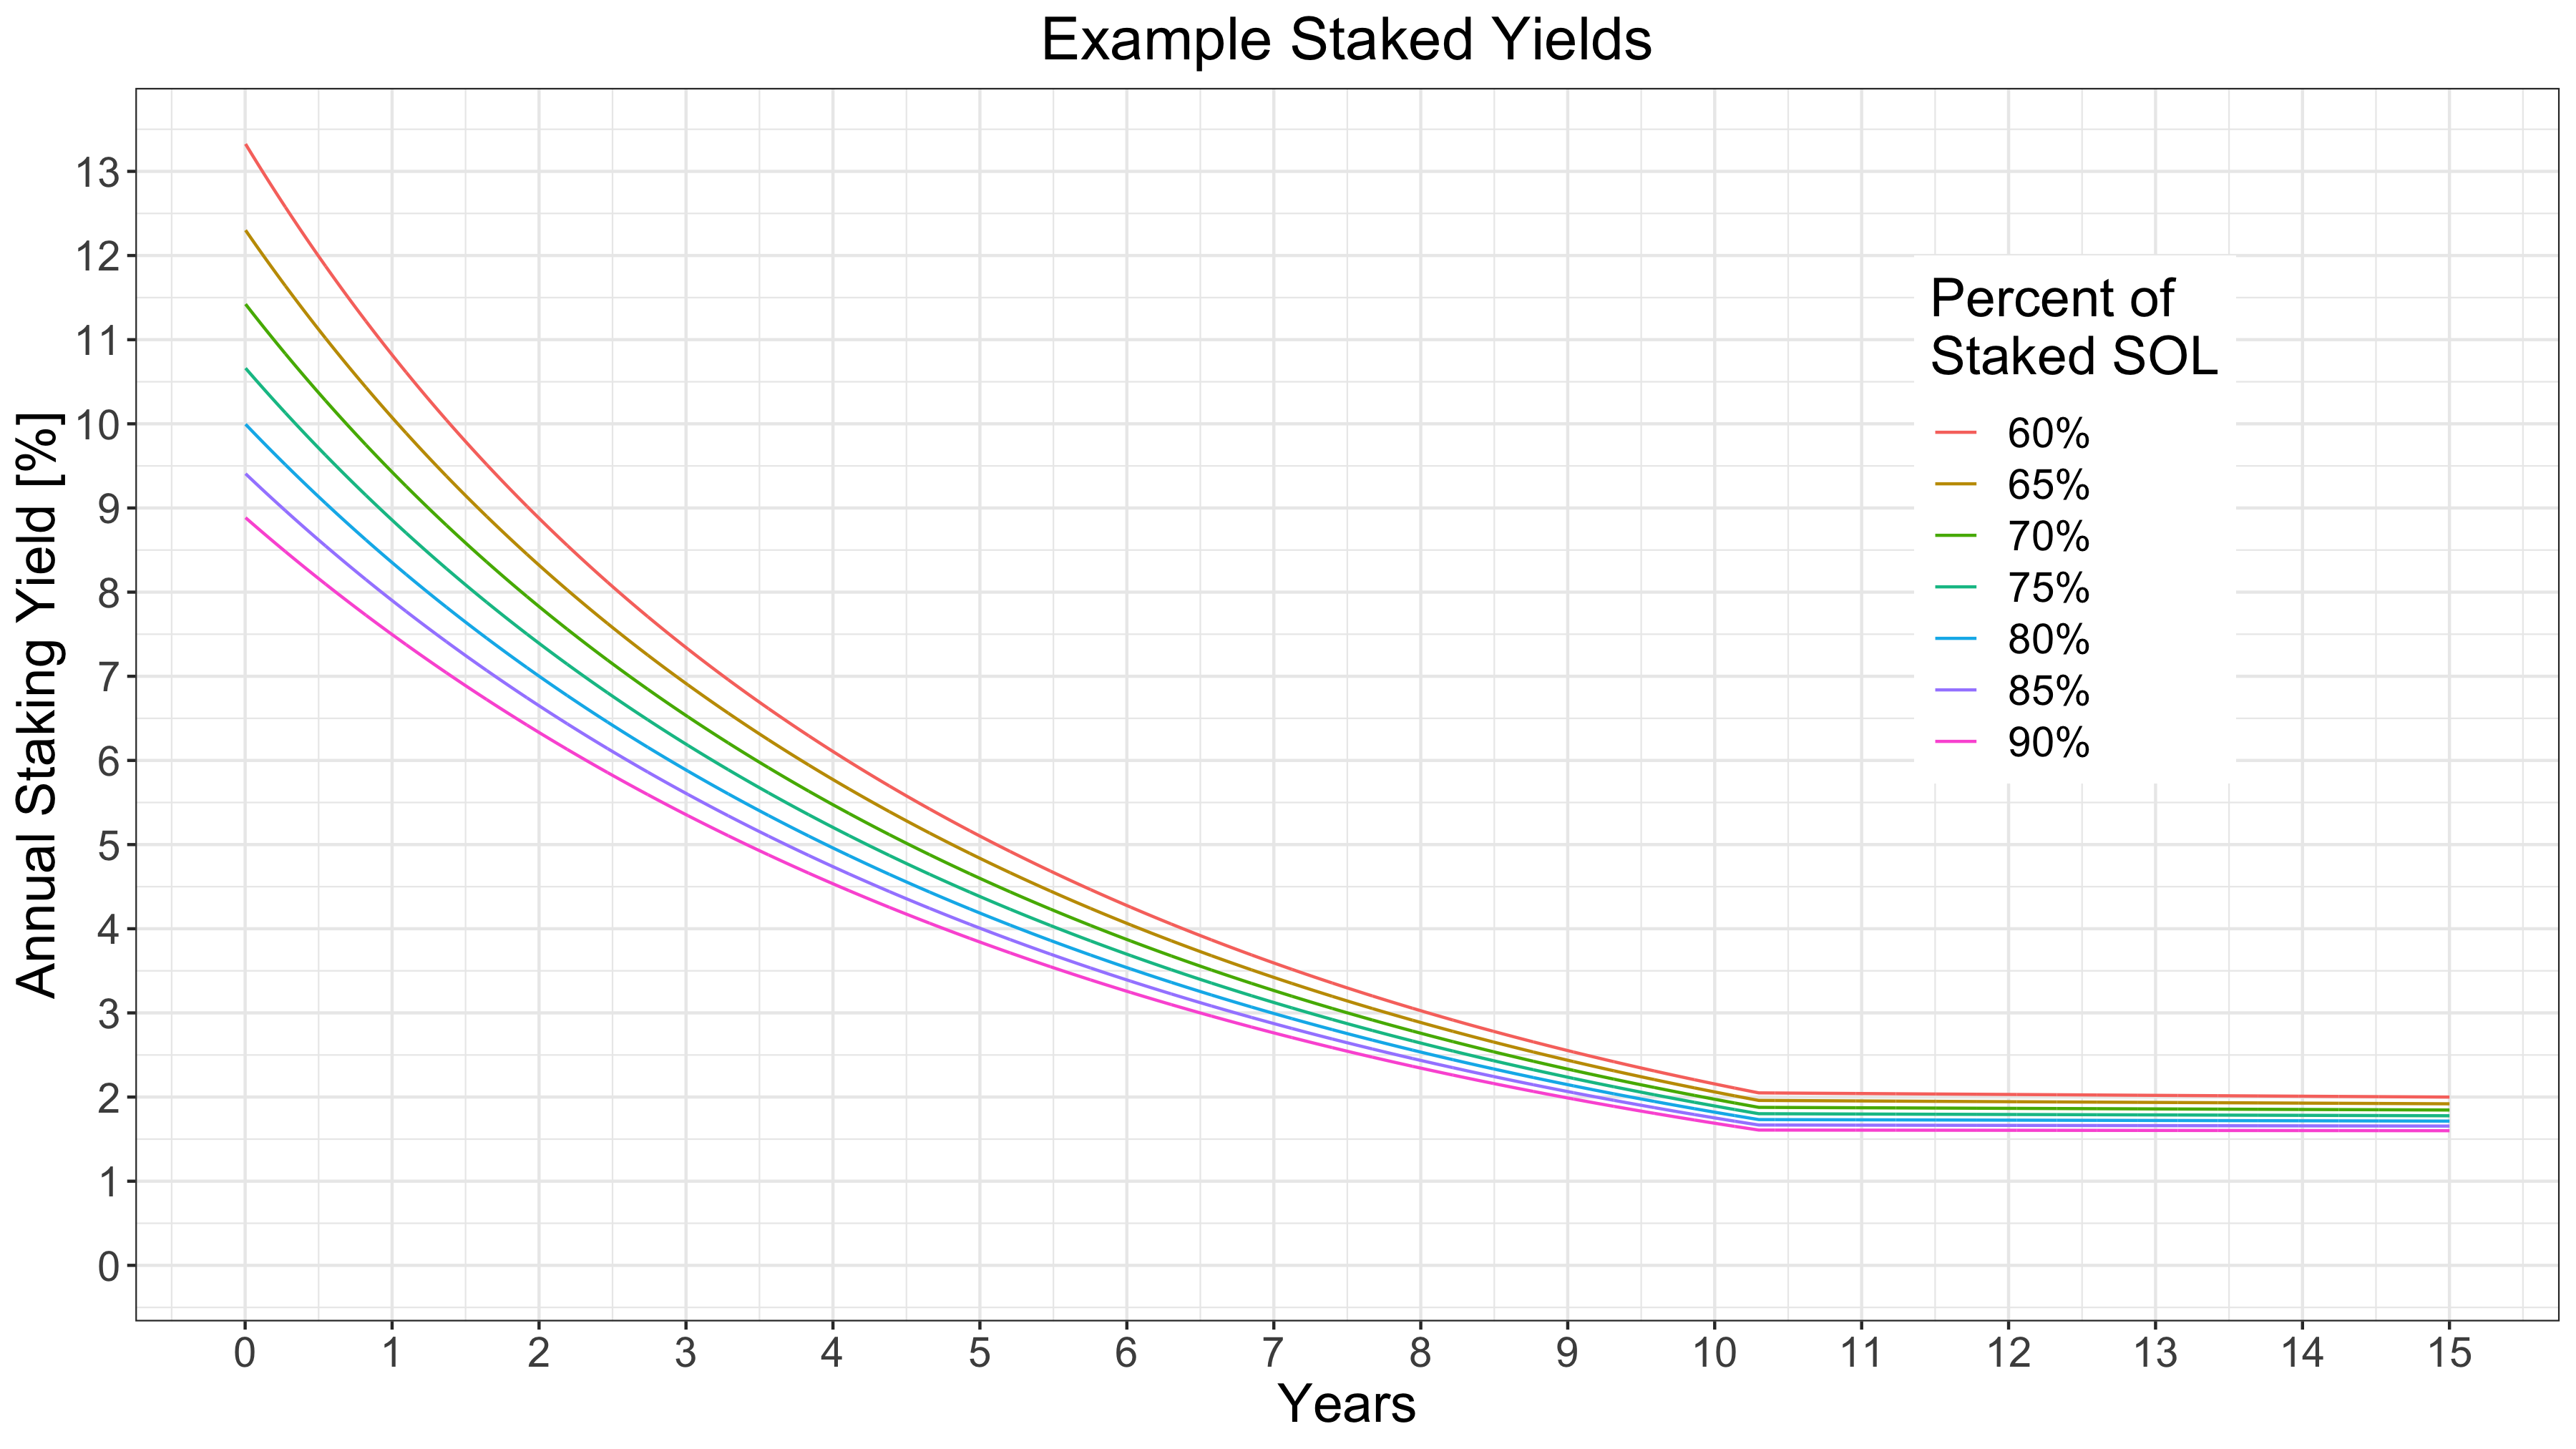 Example staked yields graph